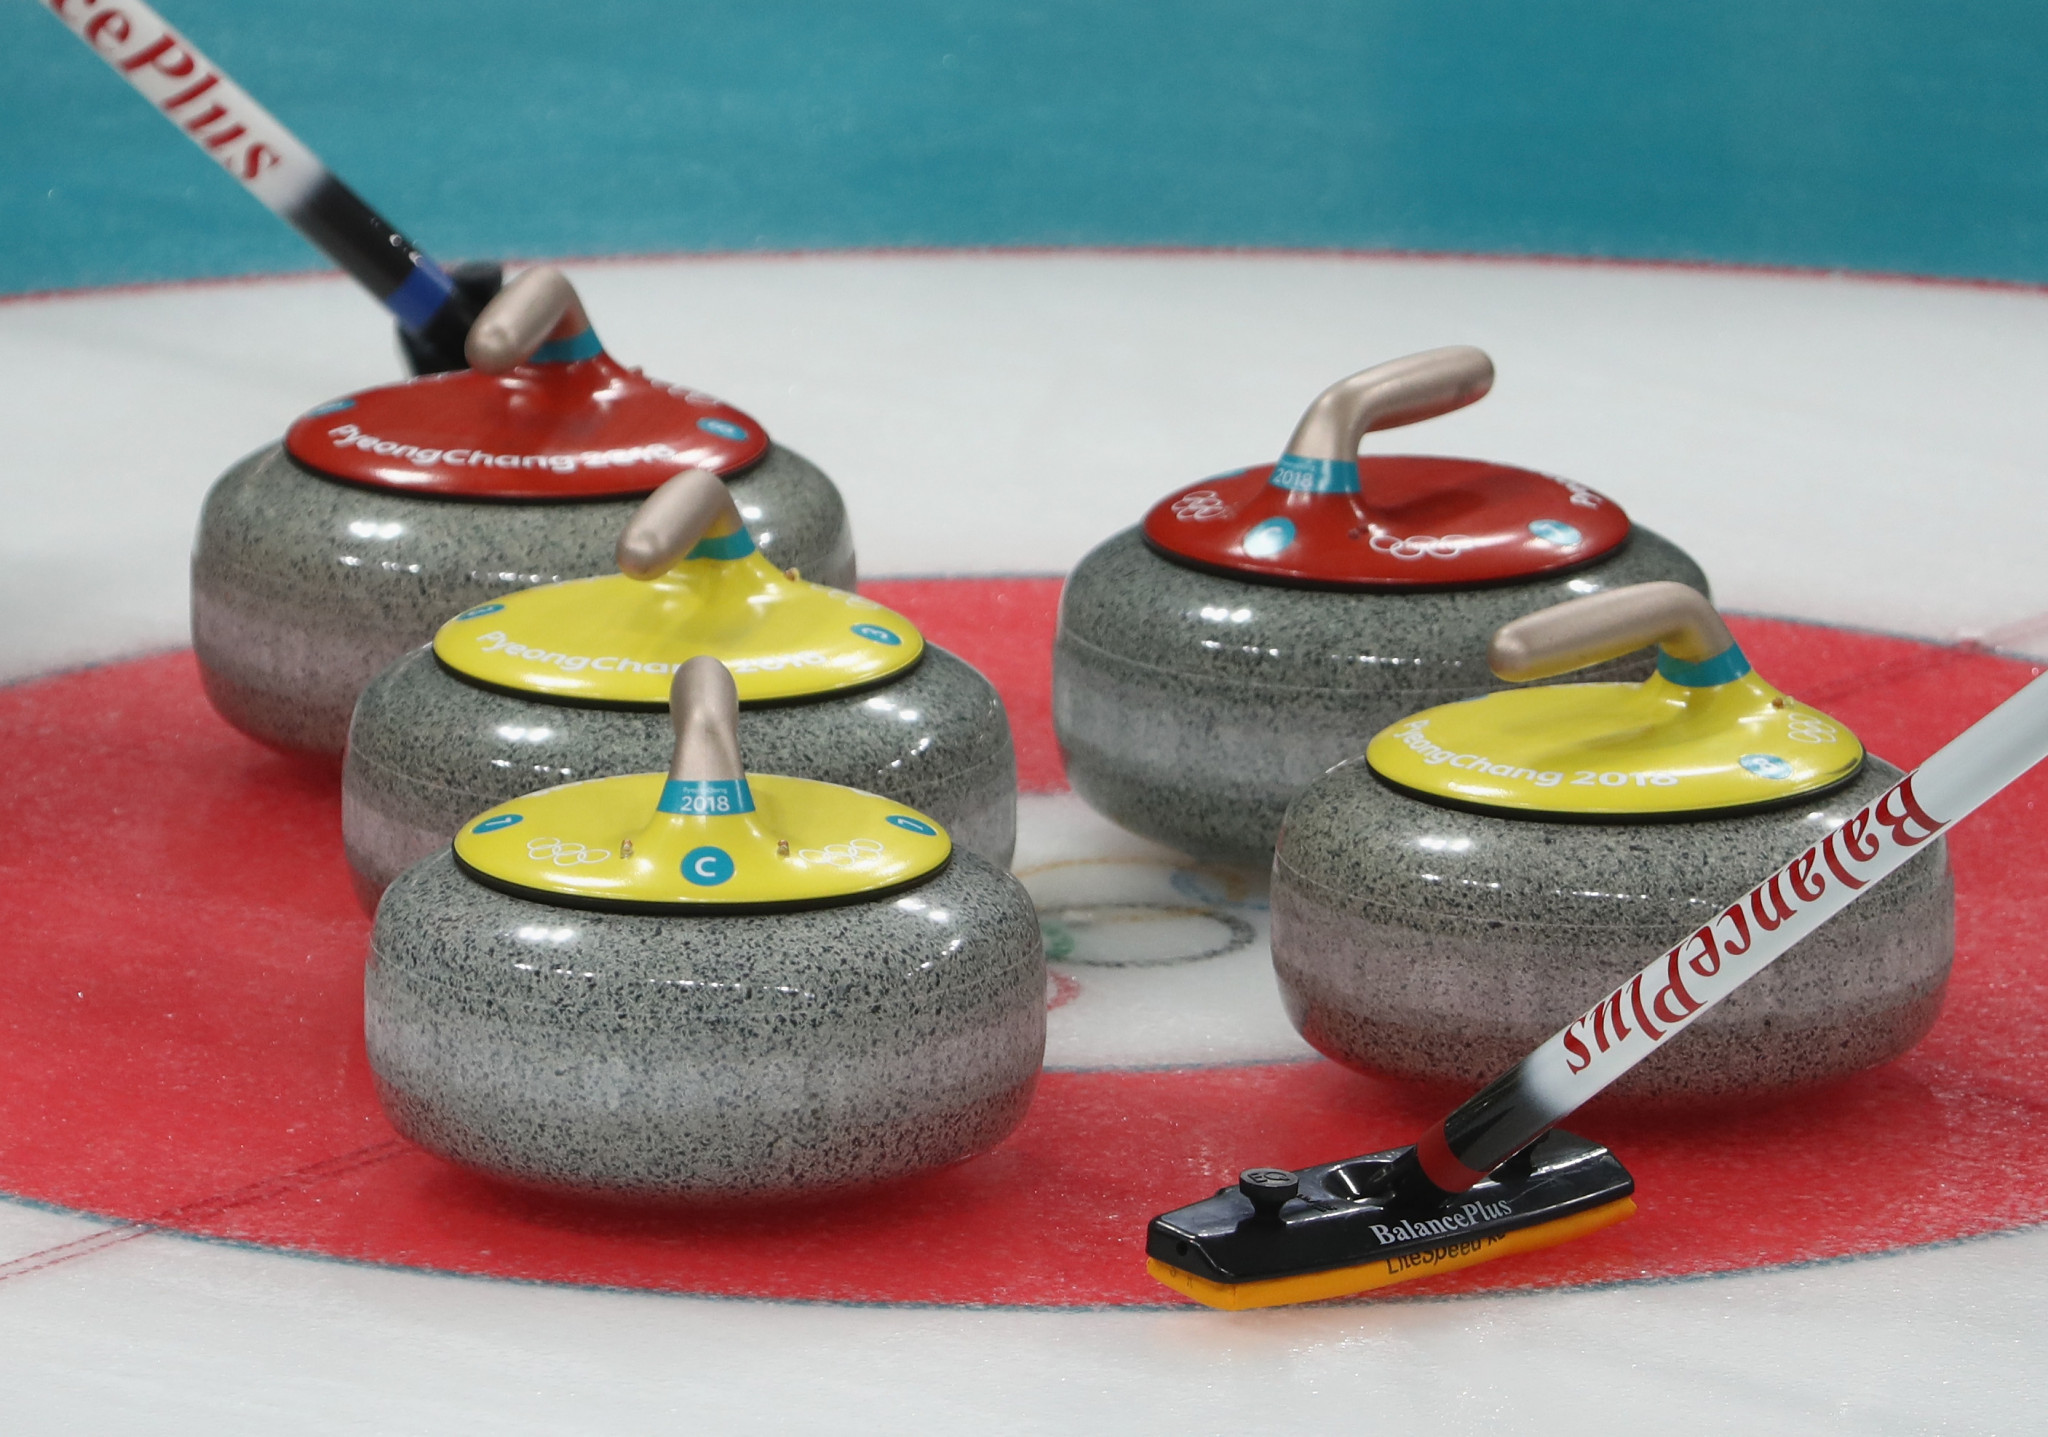 World Curling Qualification Event and World Junior-B Championships to be held in Lohja